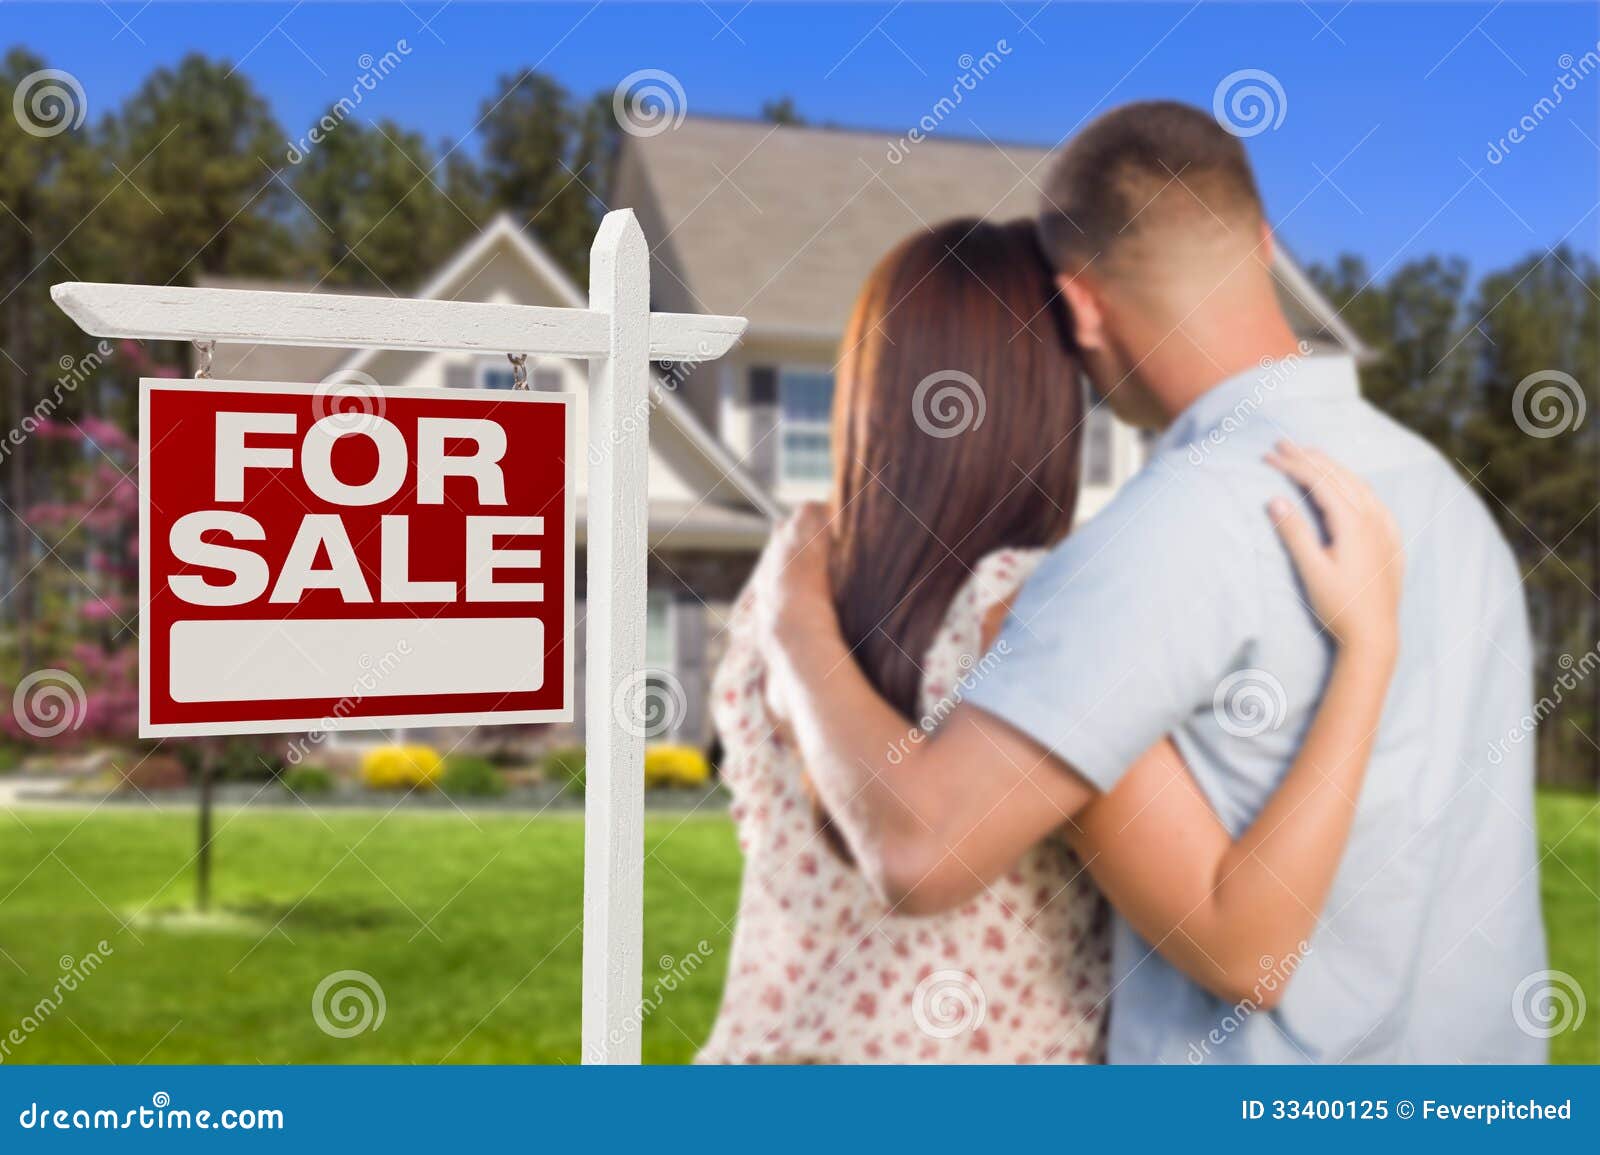 For Sale Real Estate Sign Military Couple Looking At House Royalty